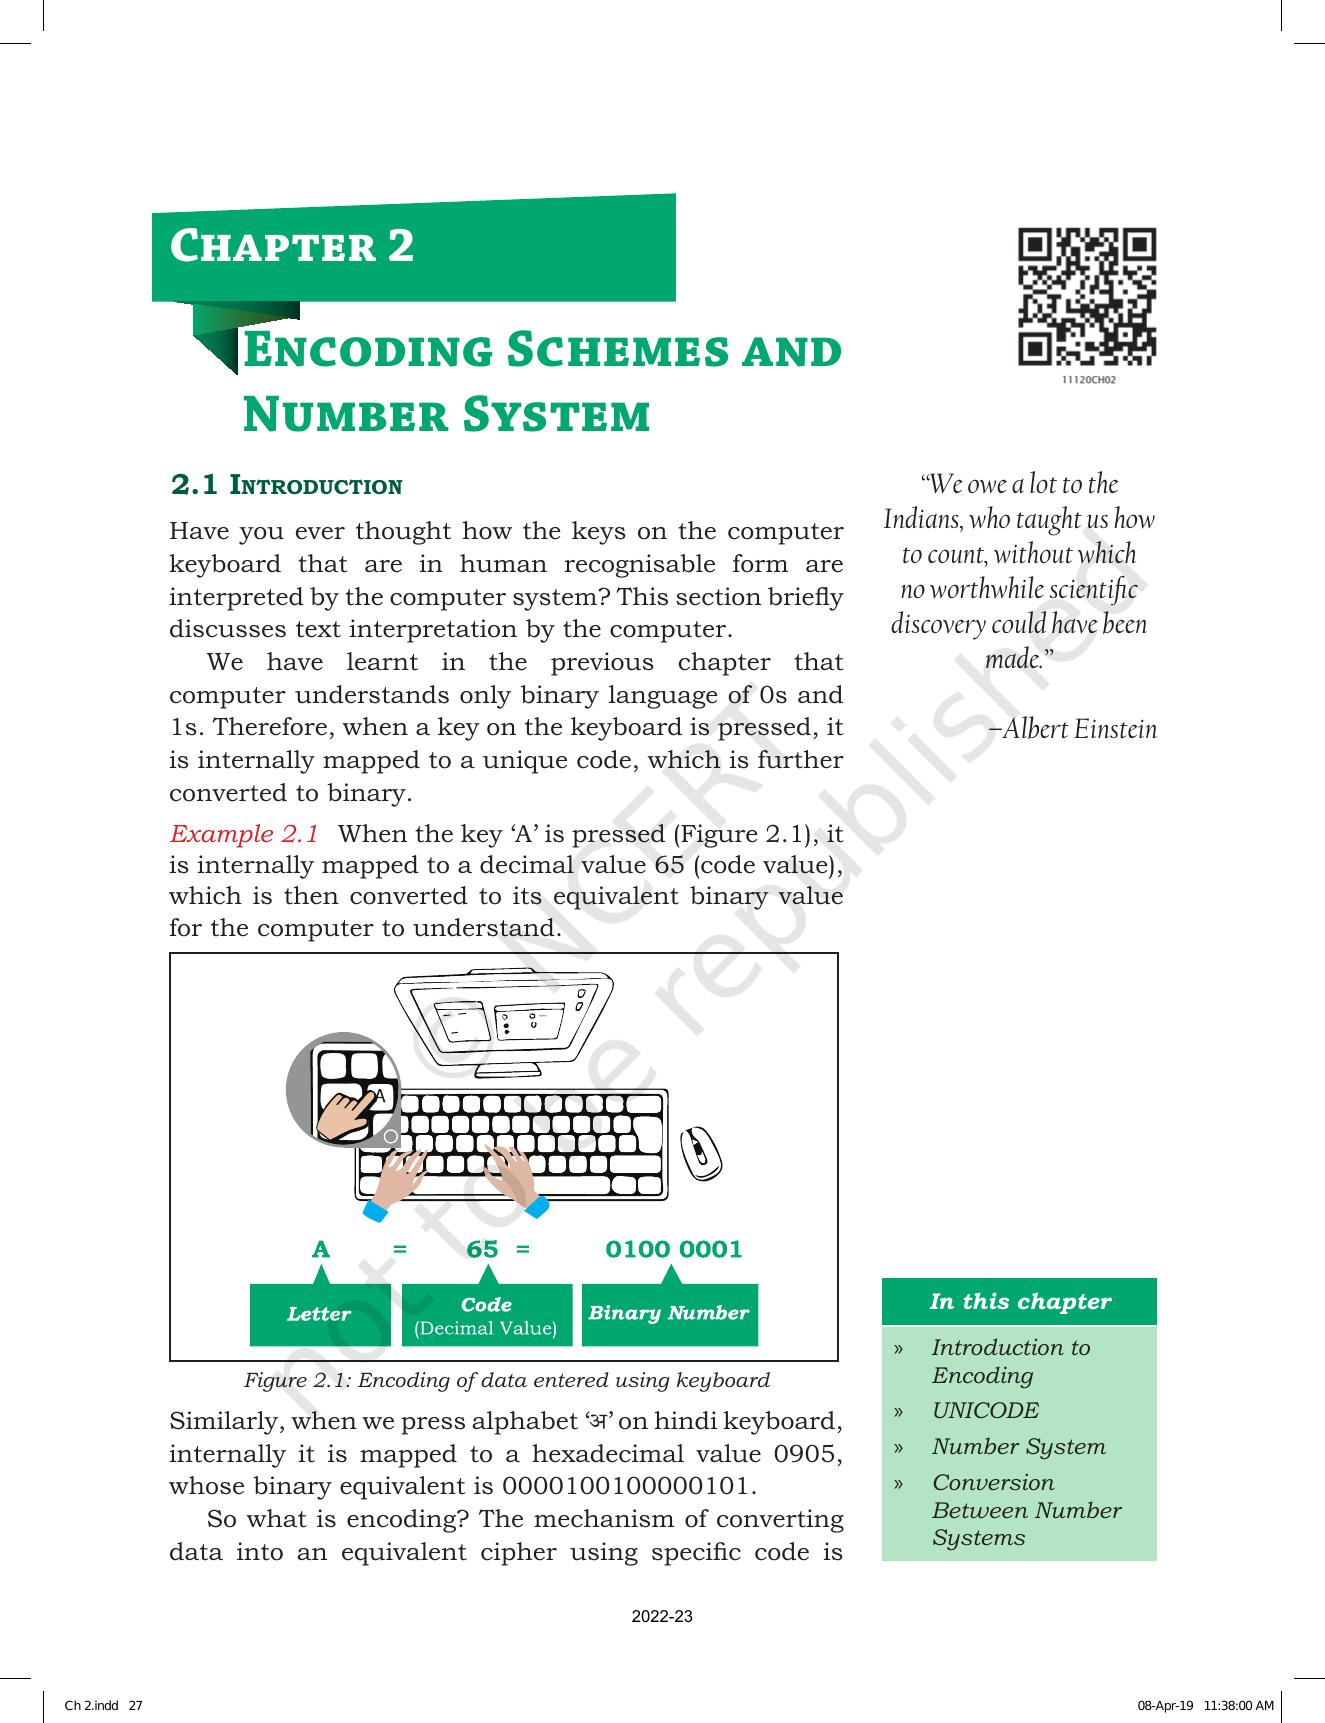 NCERT Book for Class 11 Computer Science Chapter 2 Encoding Schemes and Number System - Page 1